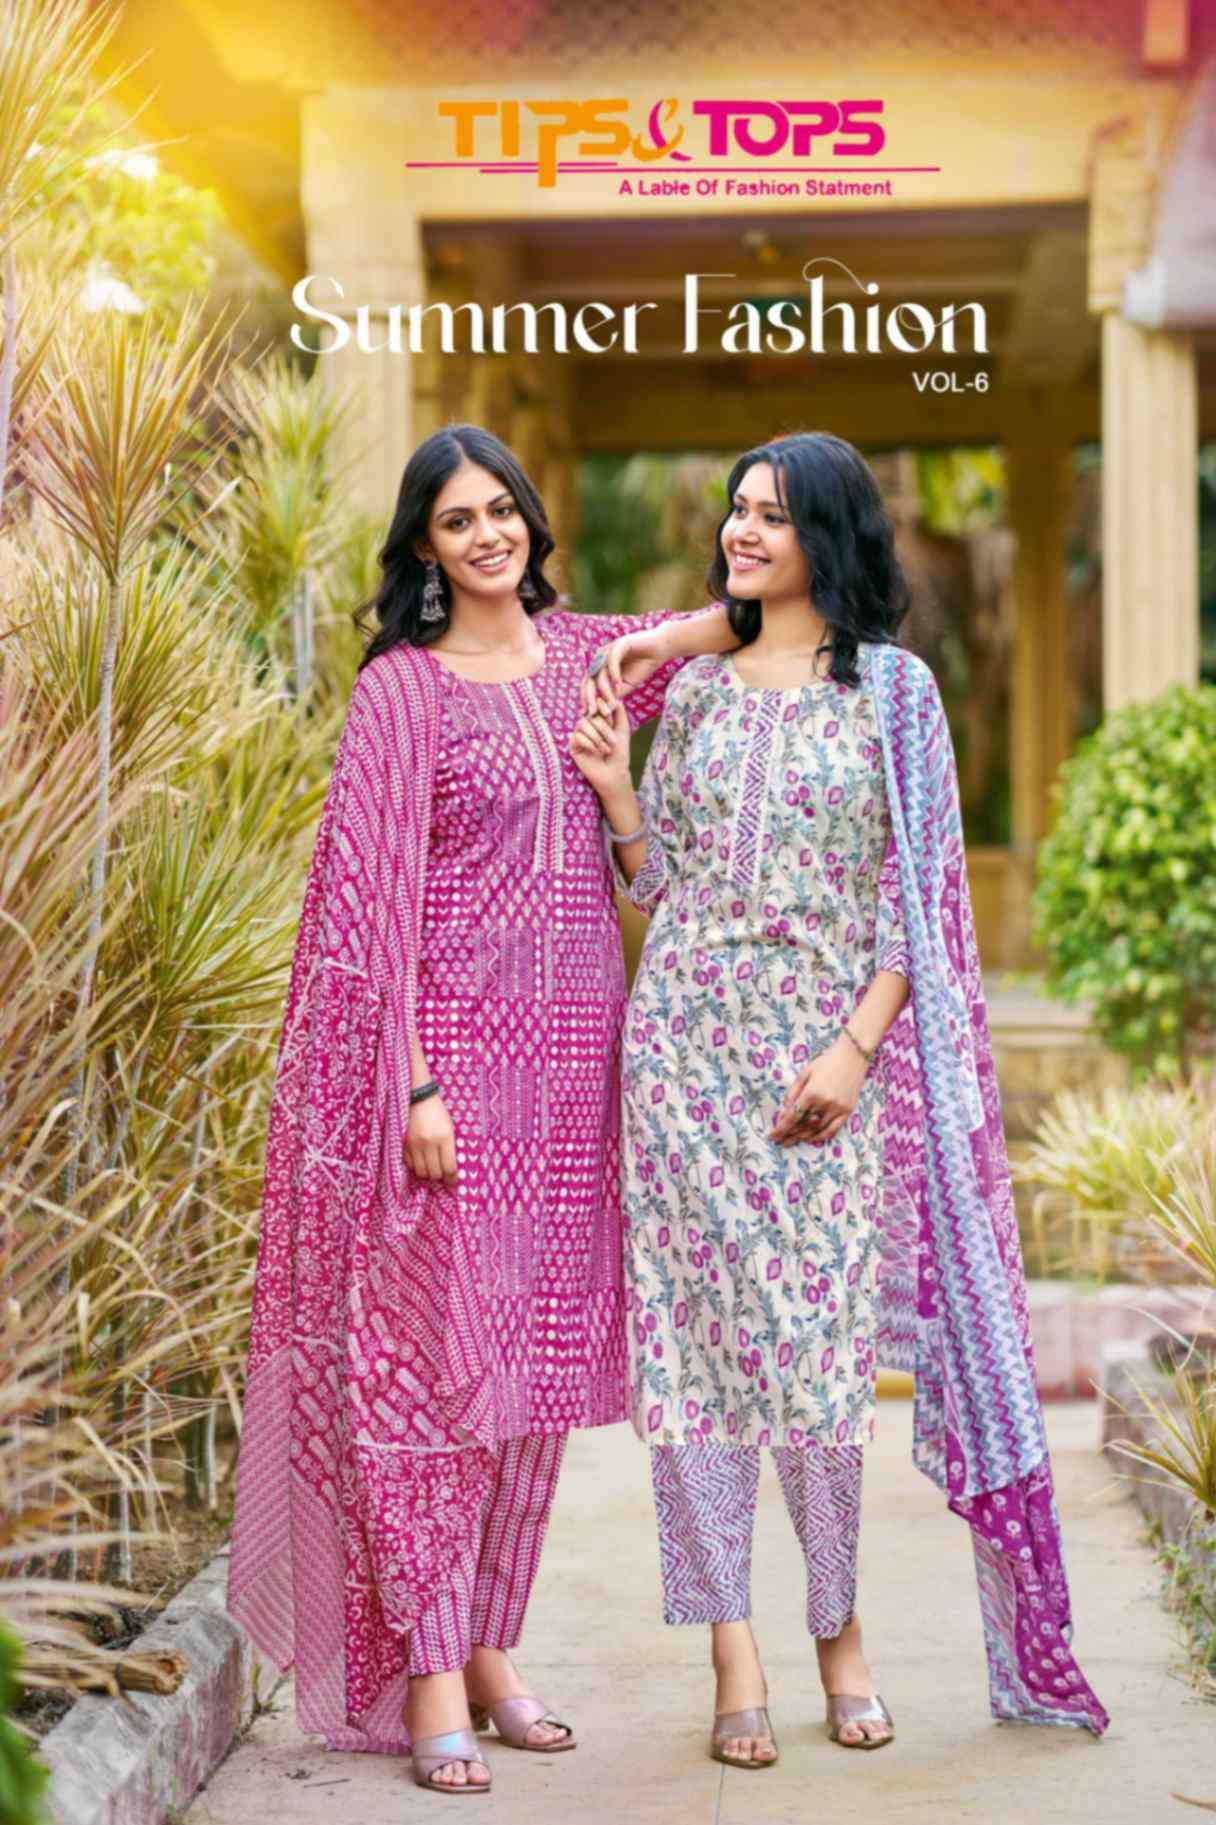 tips & tops summer fashion vol 6 series 1001-1006 cotton readymade printed suit 